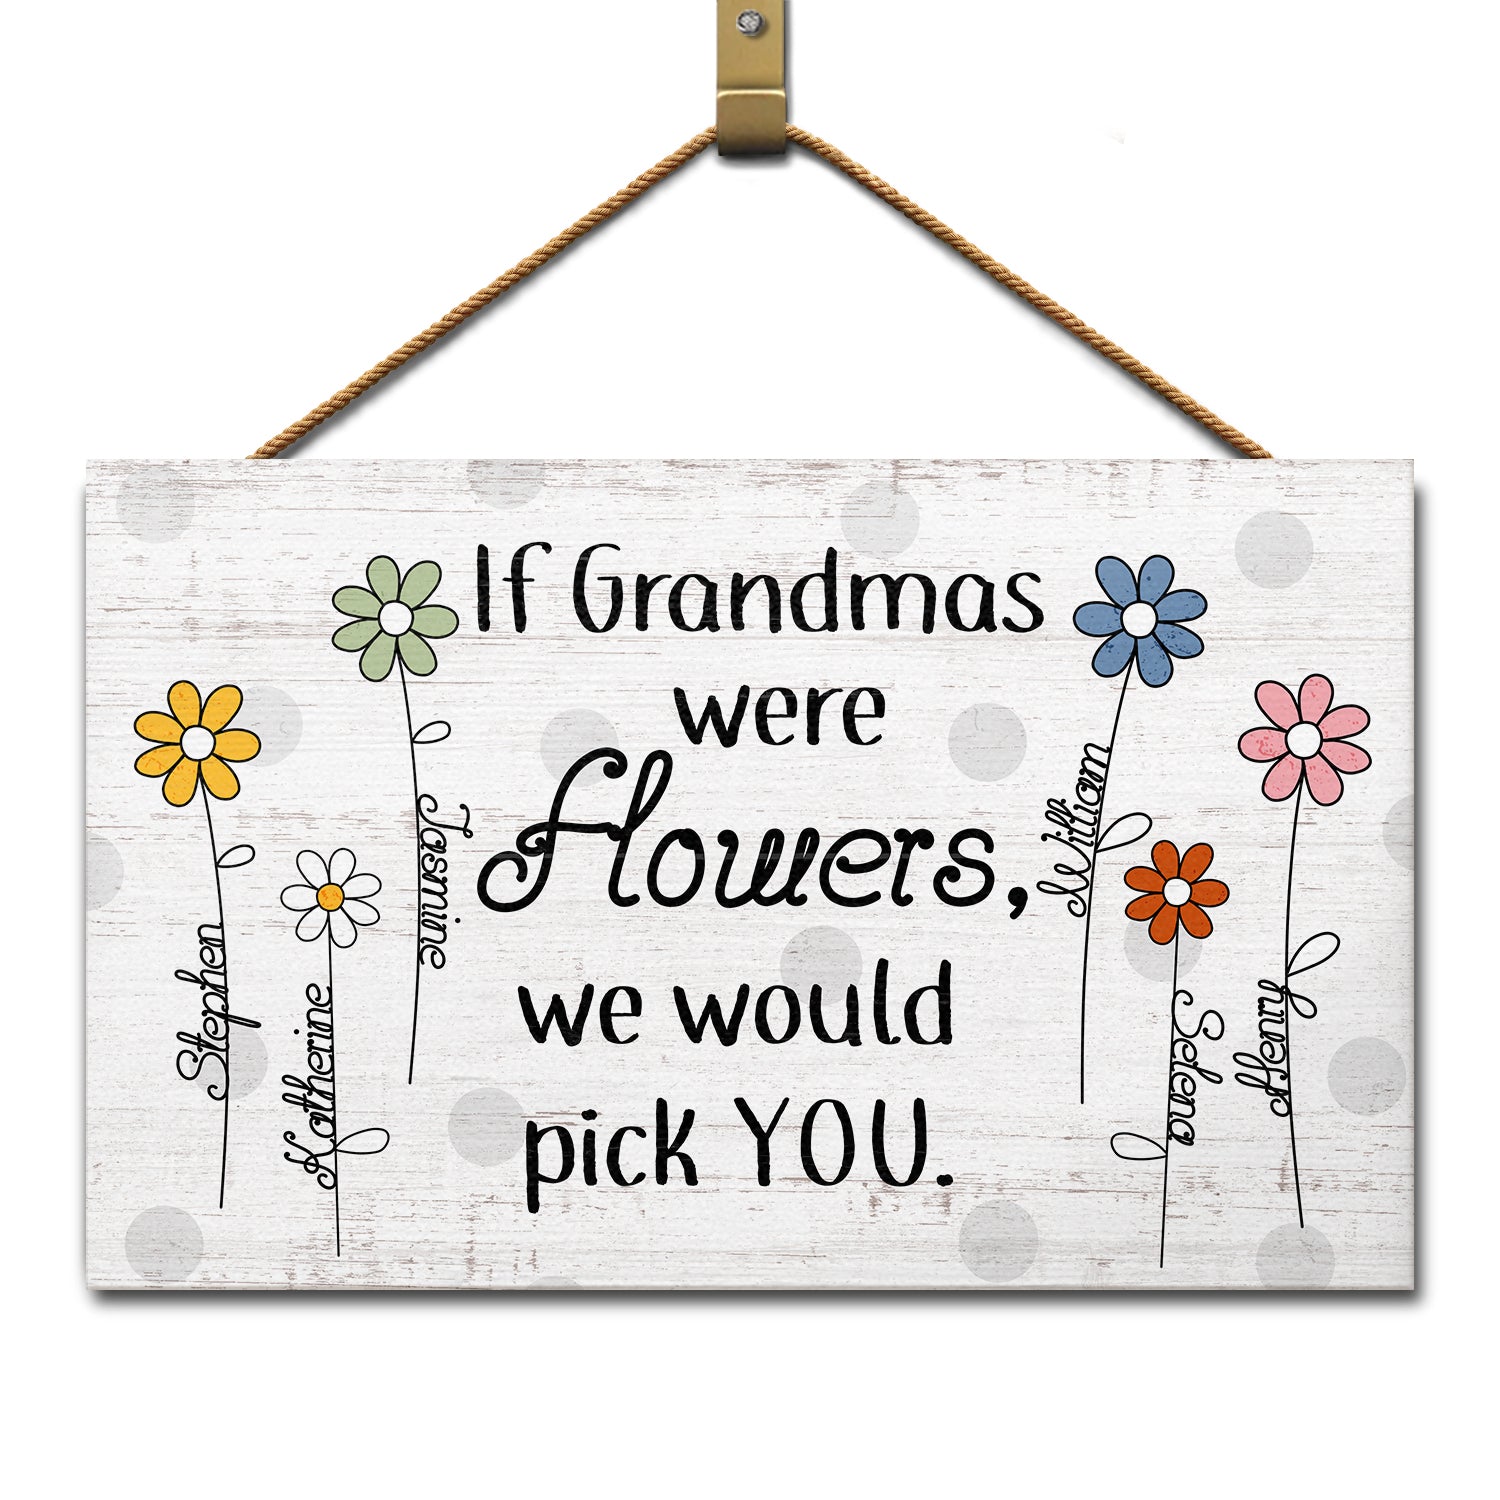 We Would Pick You - Gift For Grandma - Personalized Wood Rectangle Sign